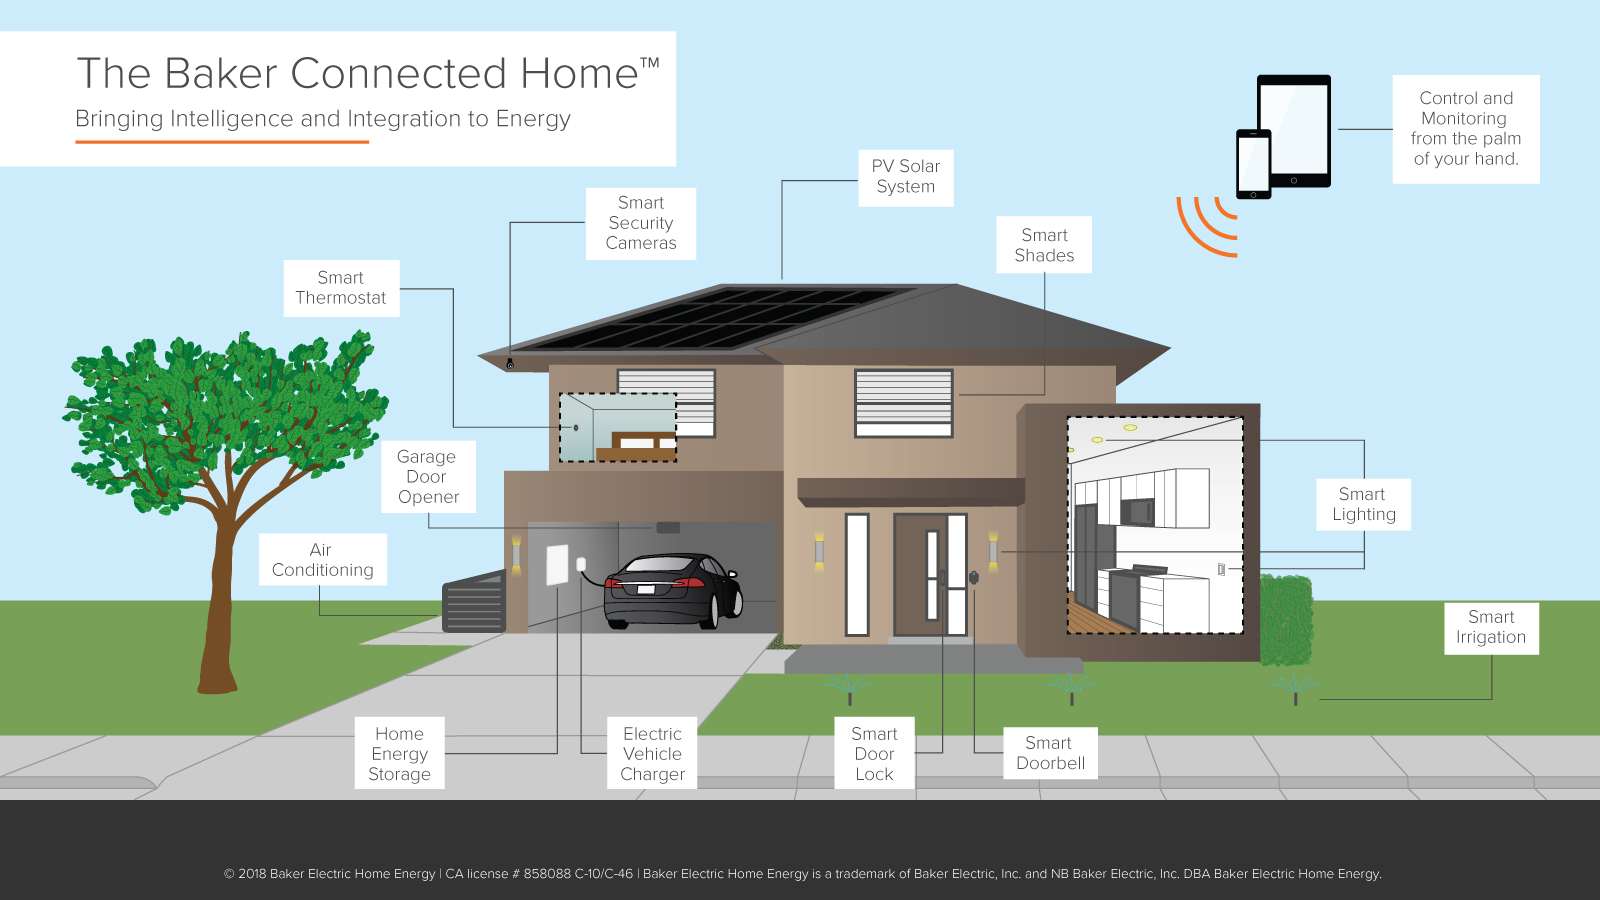 The integrated set of Baker Electric Home Energy products and services comprise The Baker Connected Home--built on the company’s core expertise.